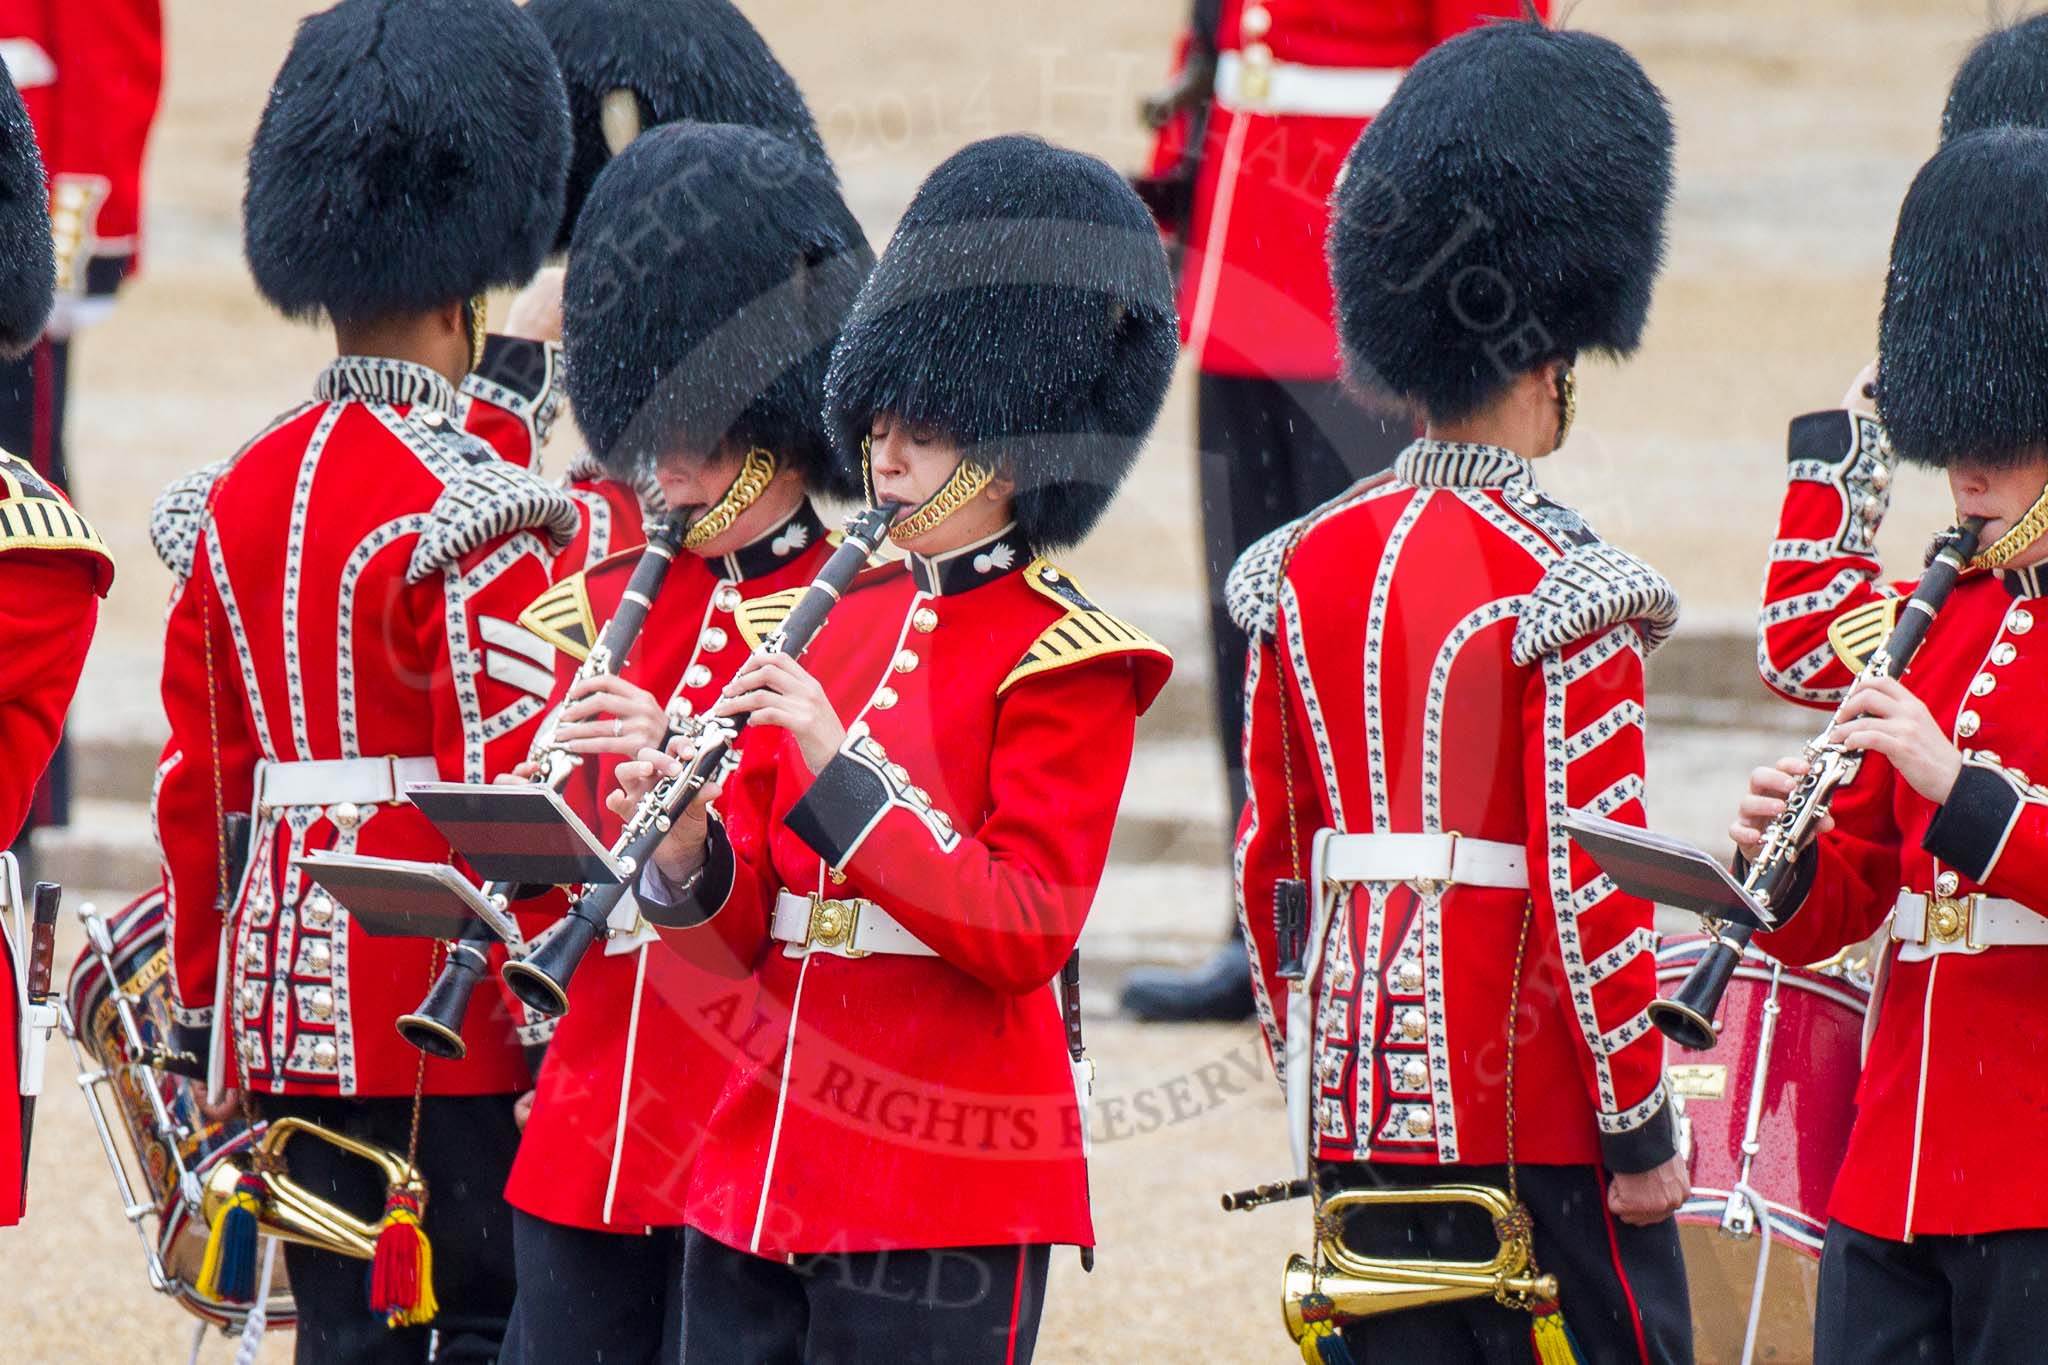 The Colonel's Review 2014.
Horse Guards Parade, Westminster,
London,

United Kingdom,
on 07 June 2014 at 11:10, image #330